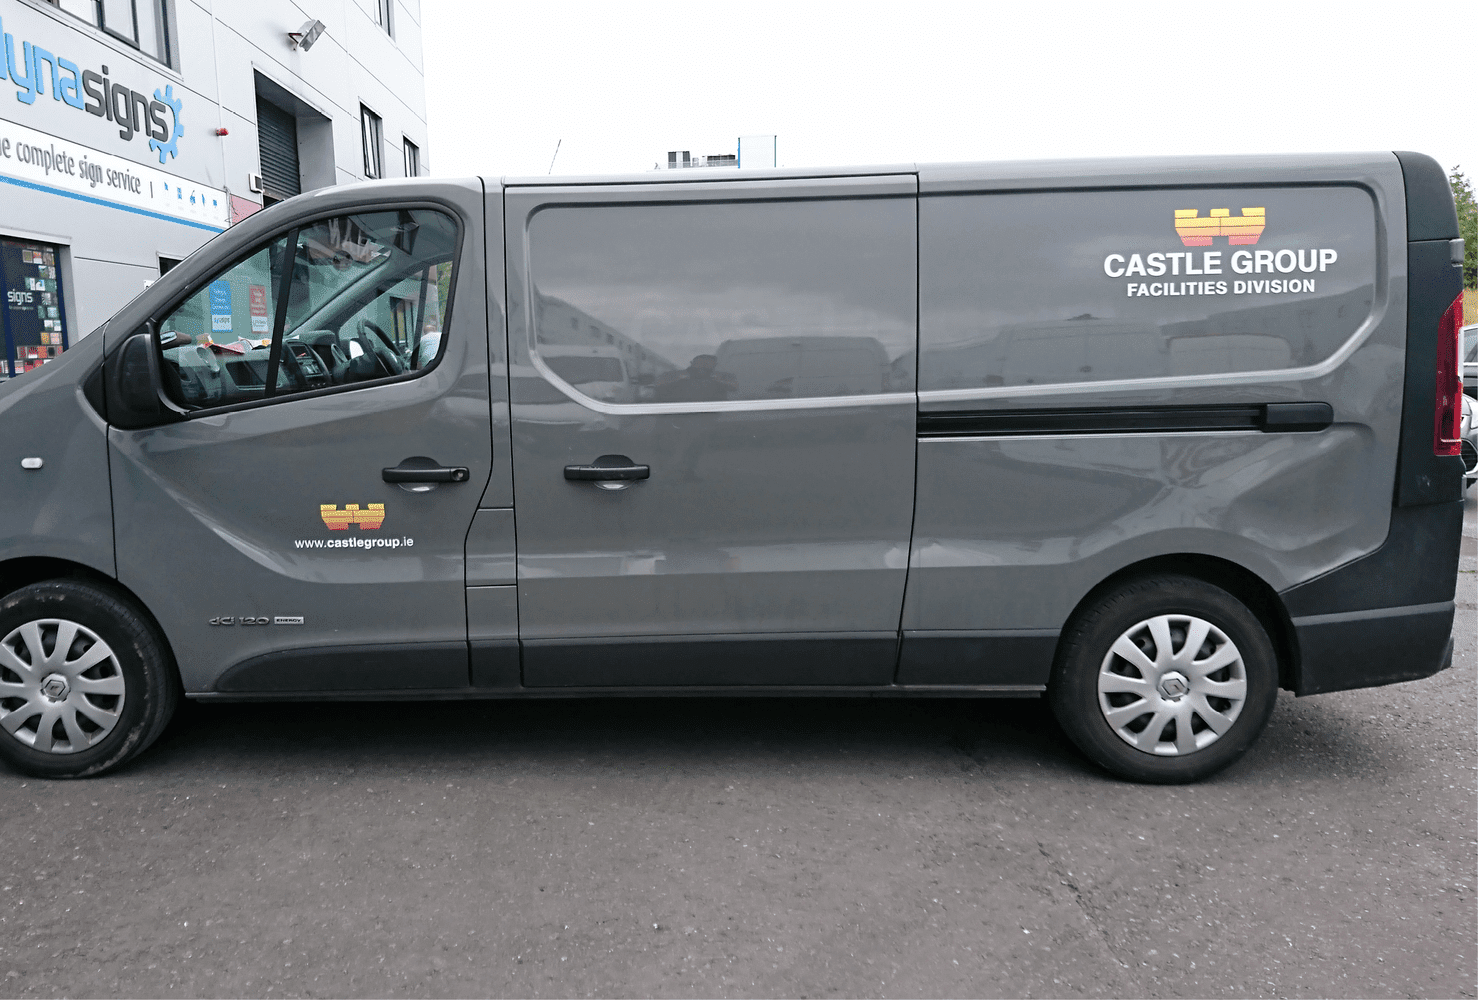 Vinyl Wrapping on Castle Group Van